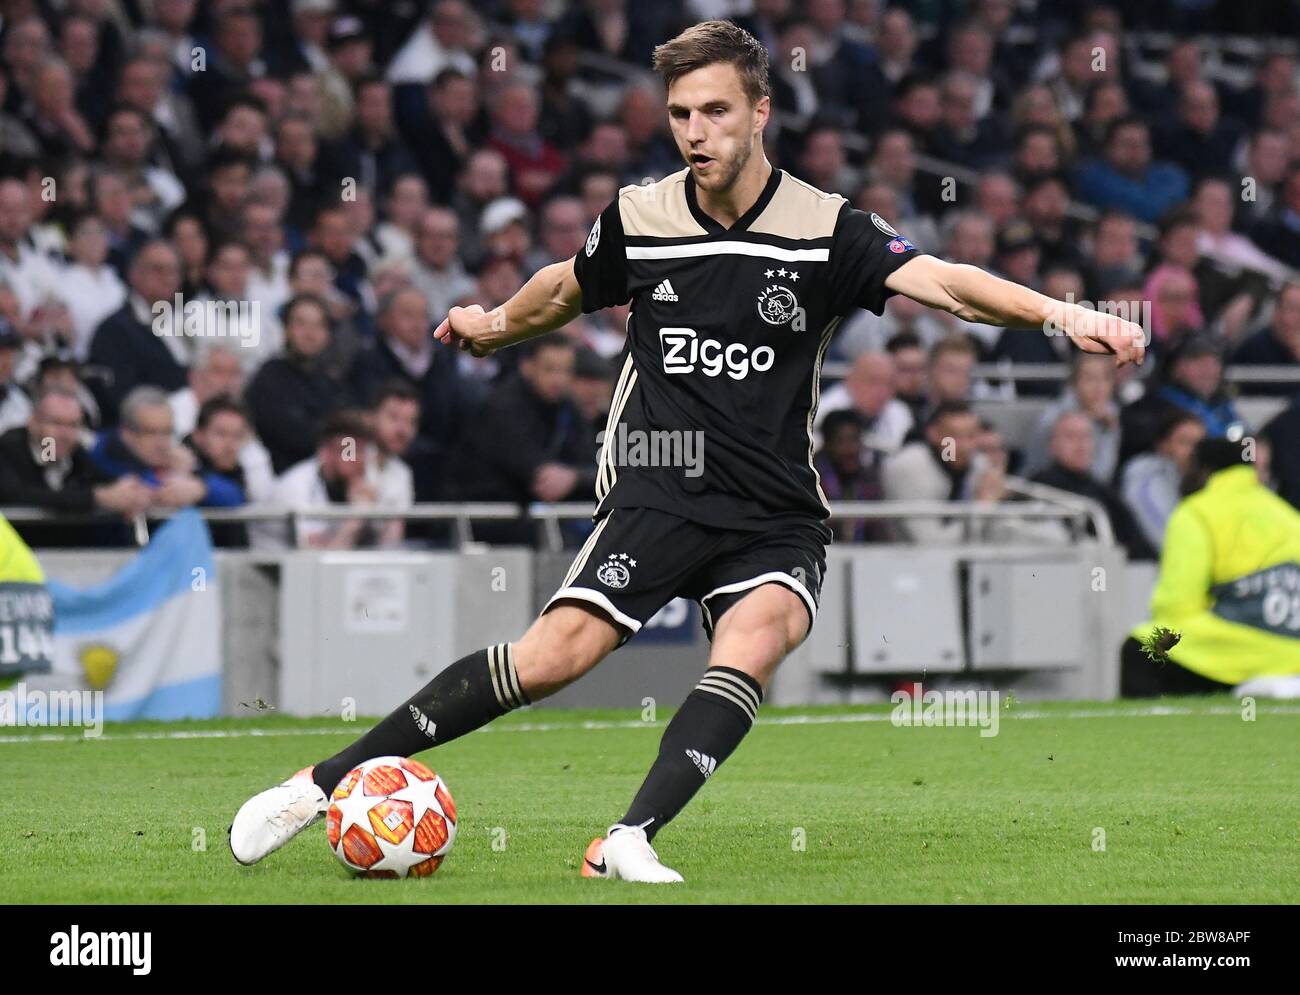 LONDON, ENGLAND - APRIL 30, 2019: Joel Veltman of Ajax pictured during the first leg of the 2018/19 UEFA Champions League Semi-finals game between Tottenham Hotspur (England) and AFC Ajax (Netherlands) at Tottenham Hotspur Stadium. Stock Photo